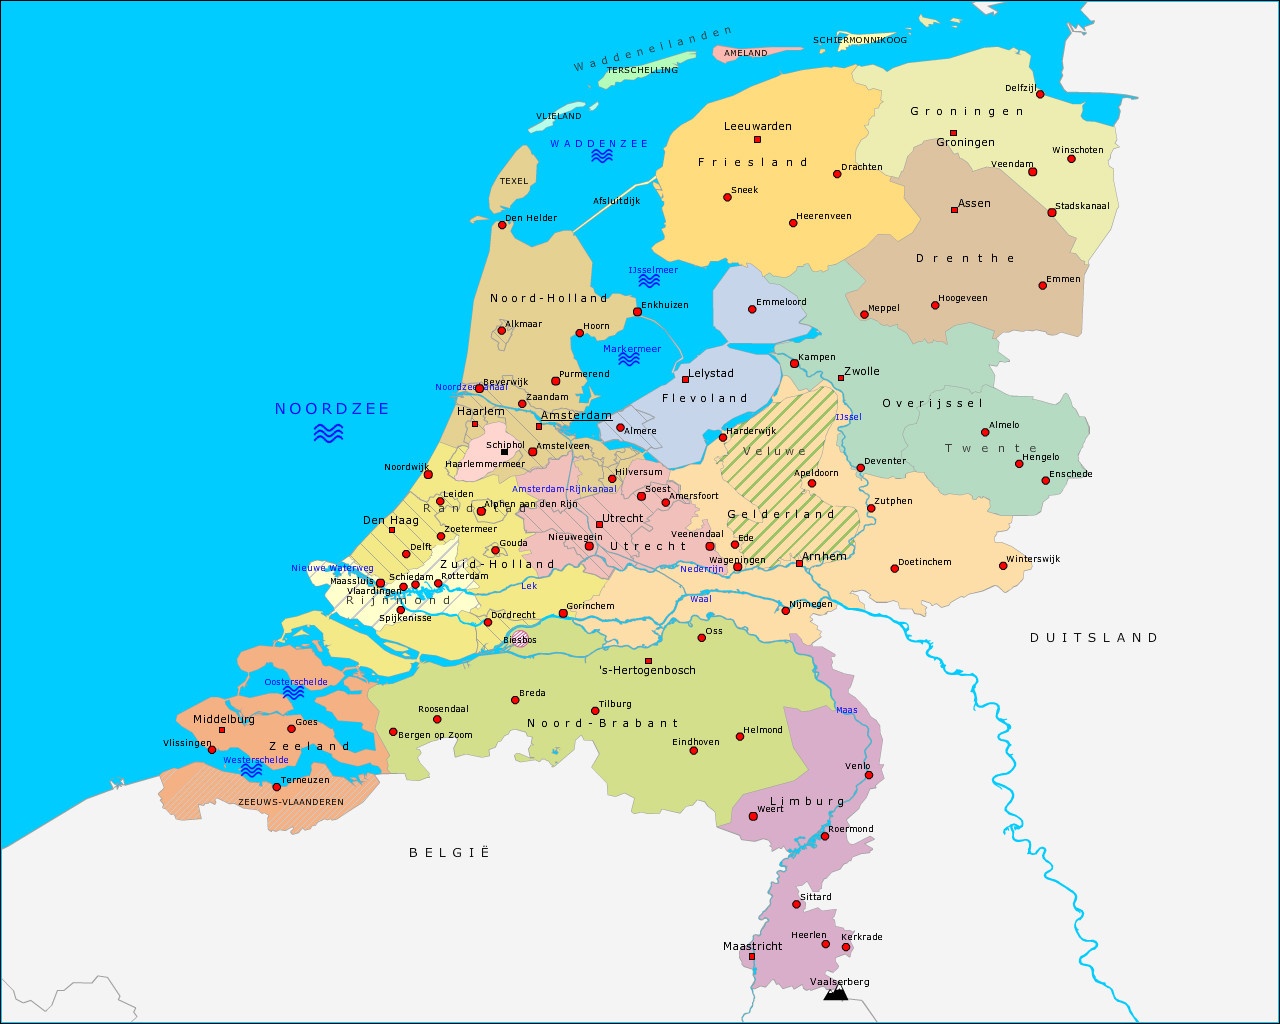 Facts and figures about games industry in The Netherlands – FLEGA